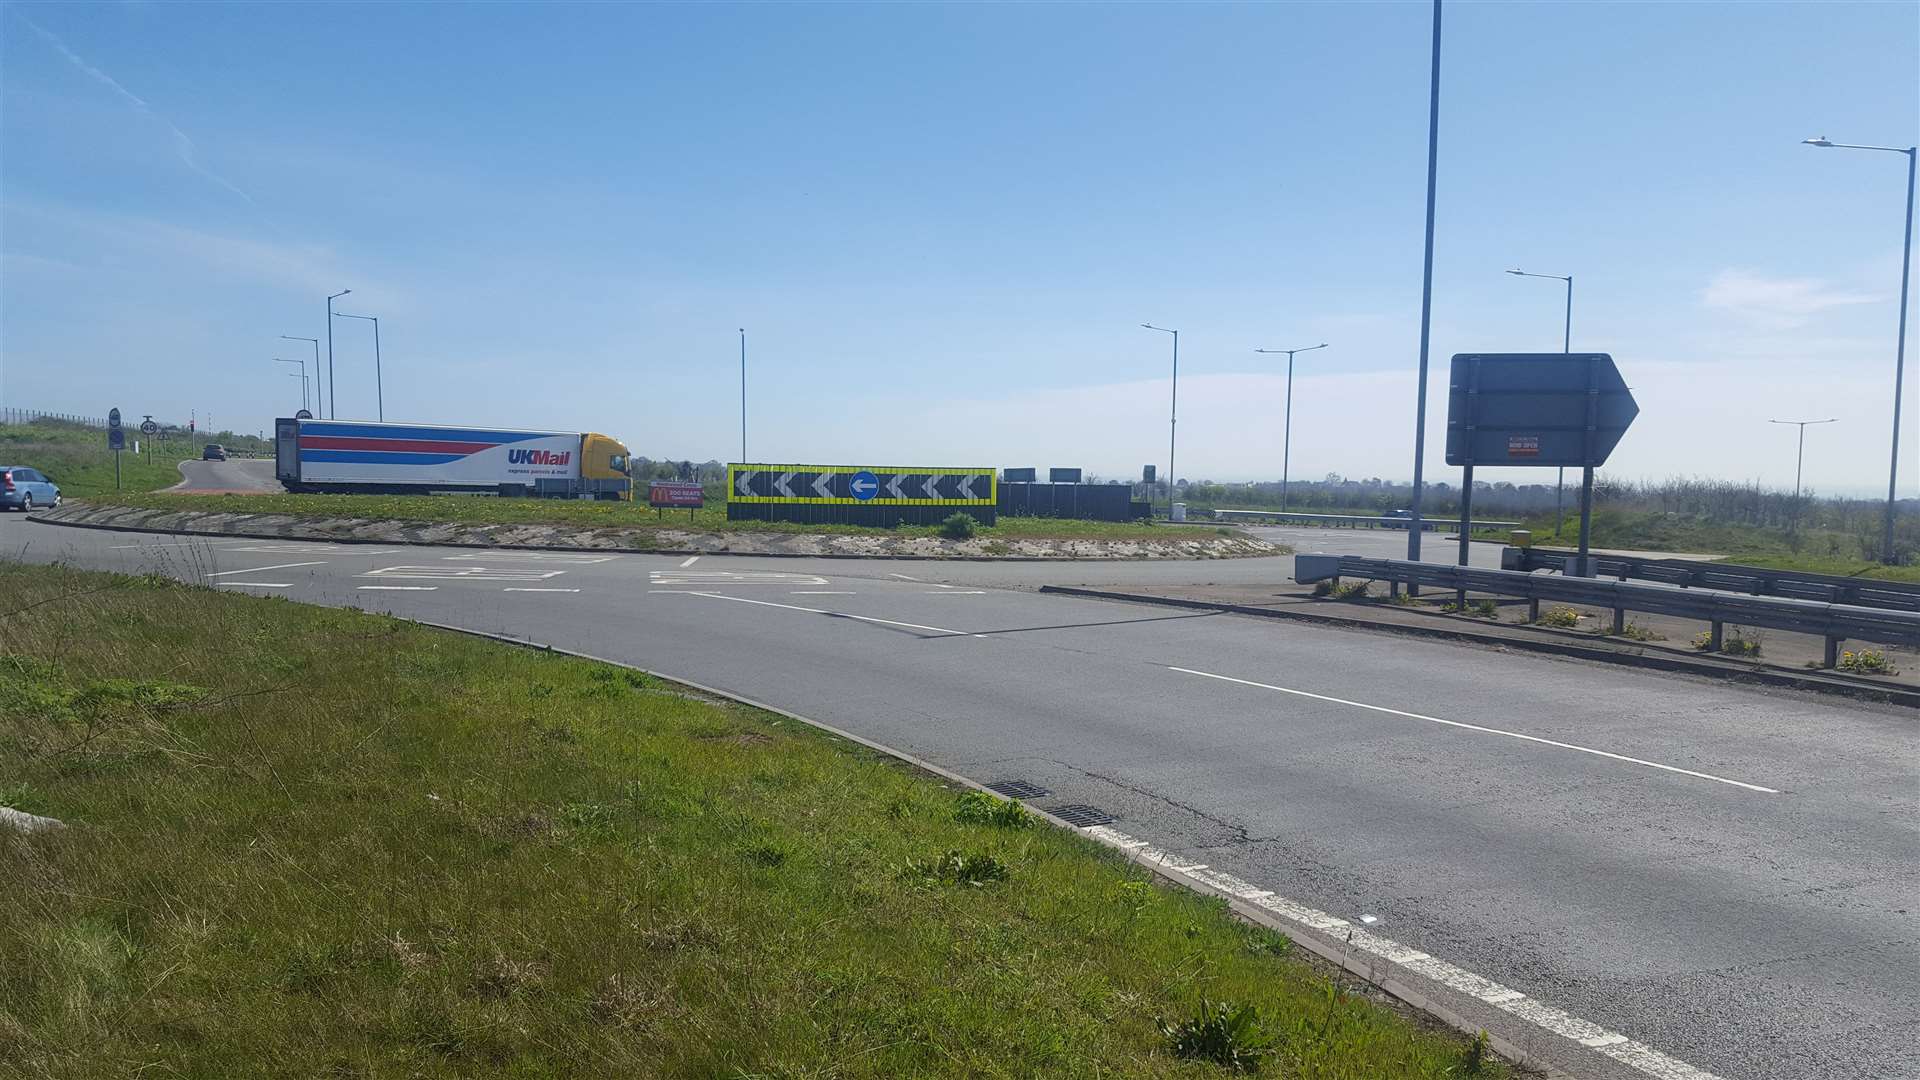 The crash happened near the Cliffsend roundabout on the A299 Hengist Way